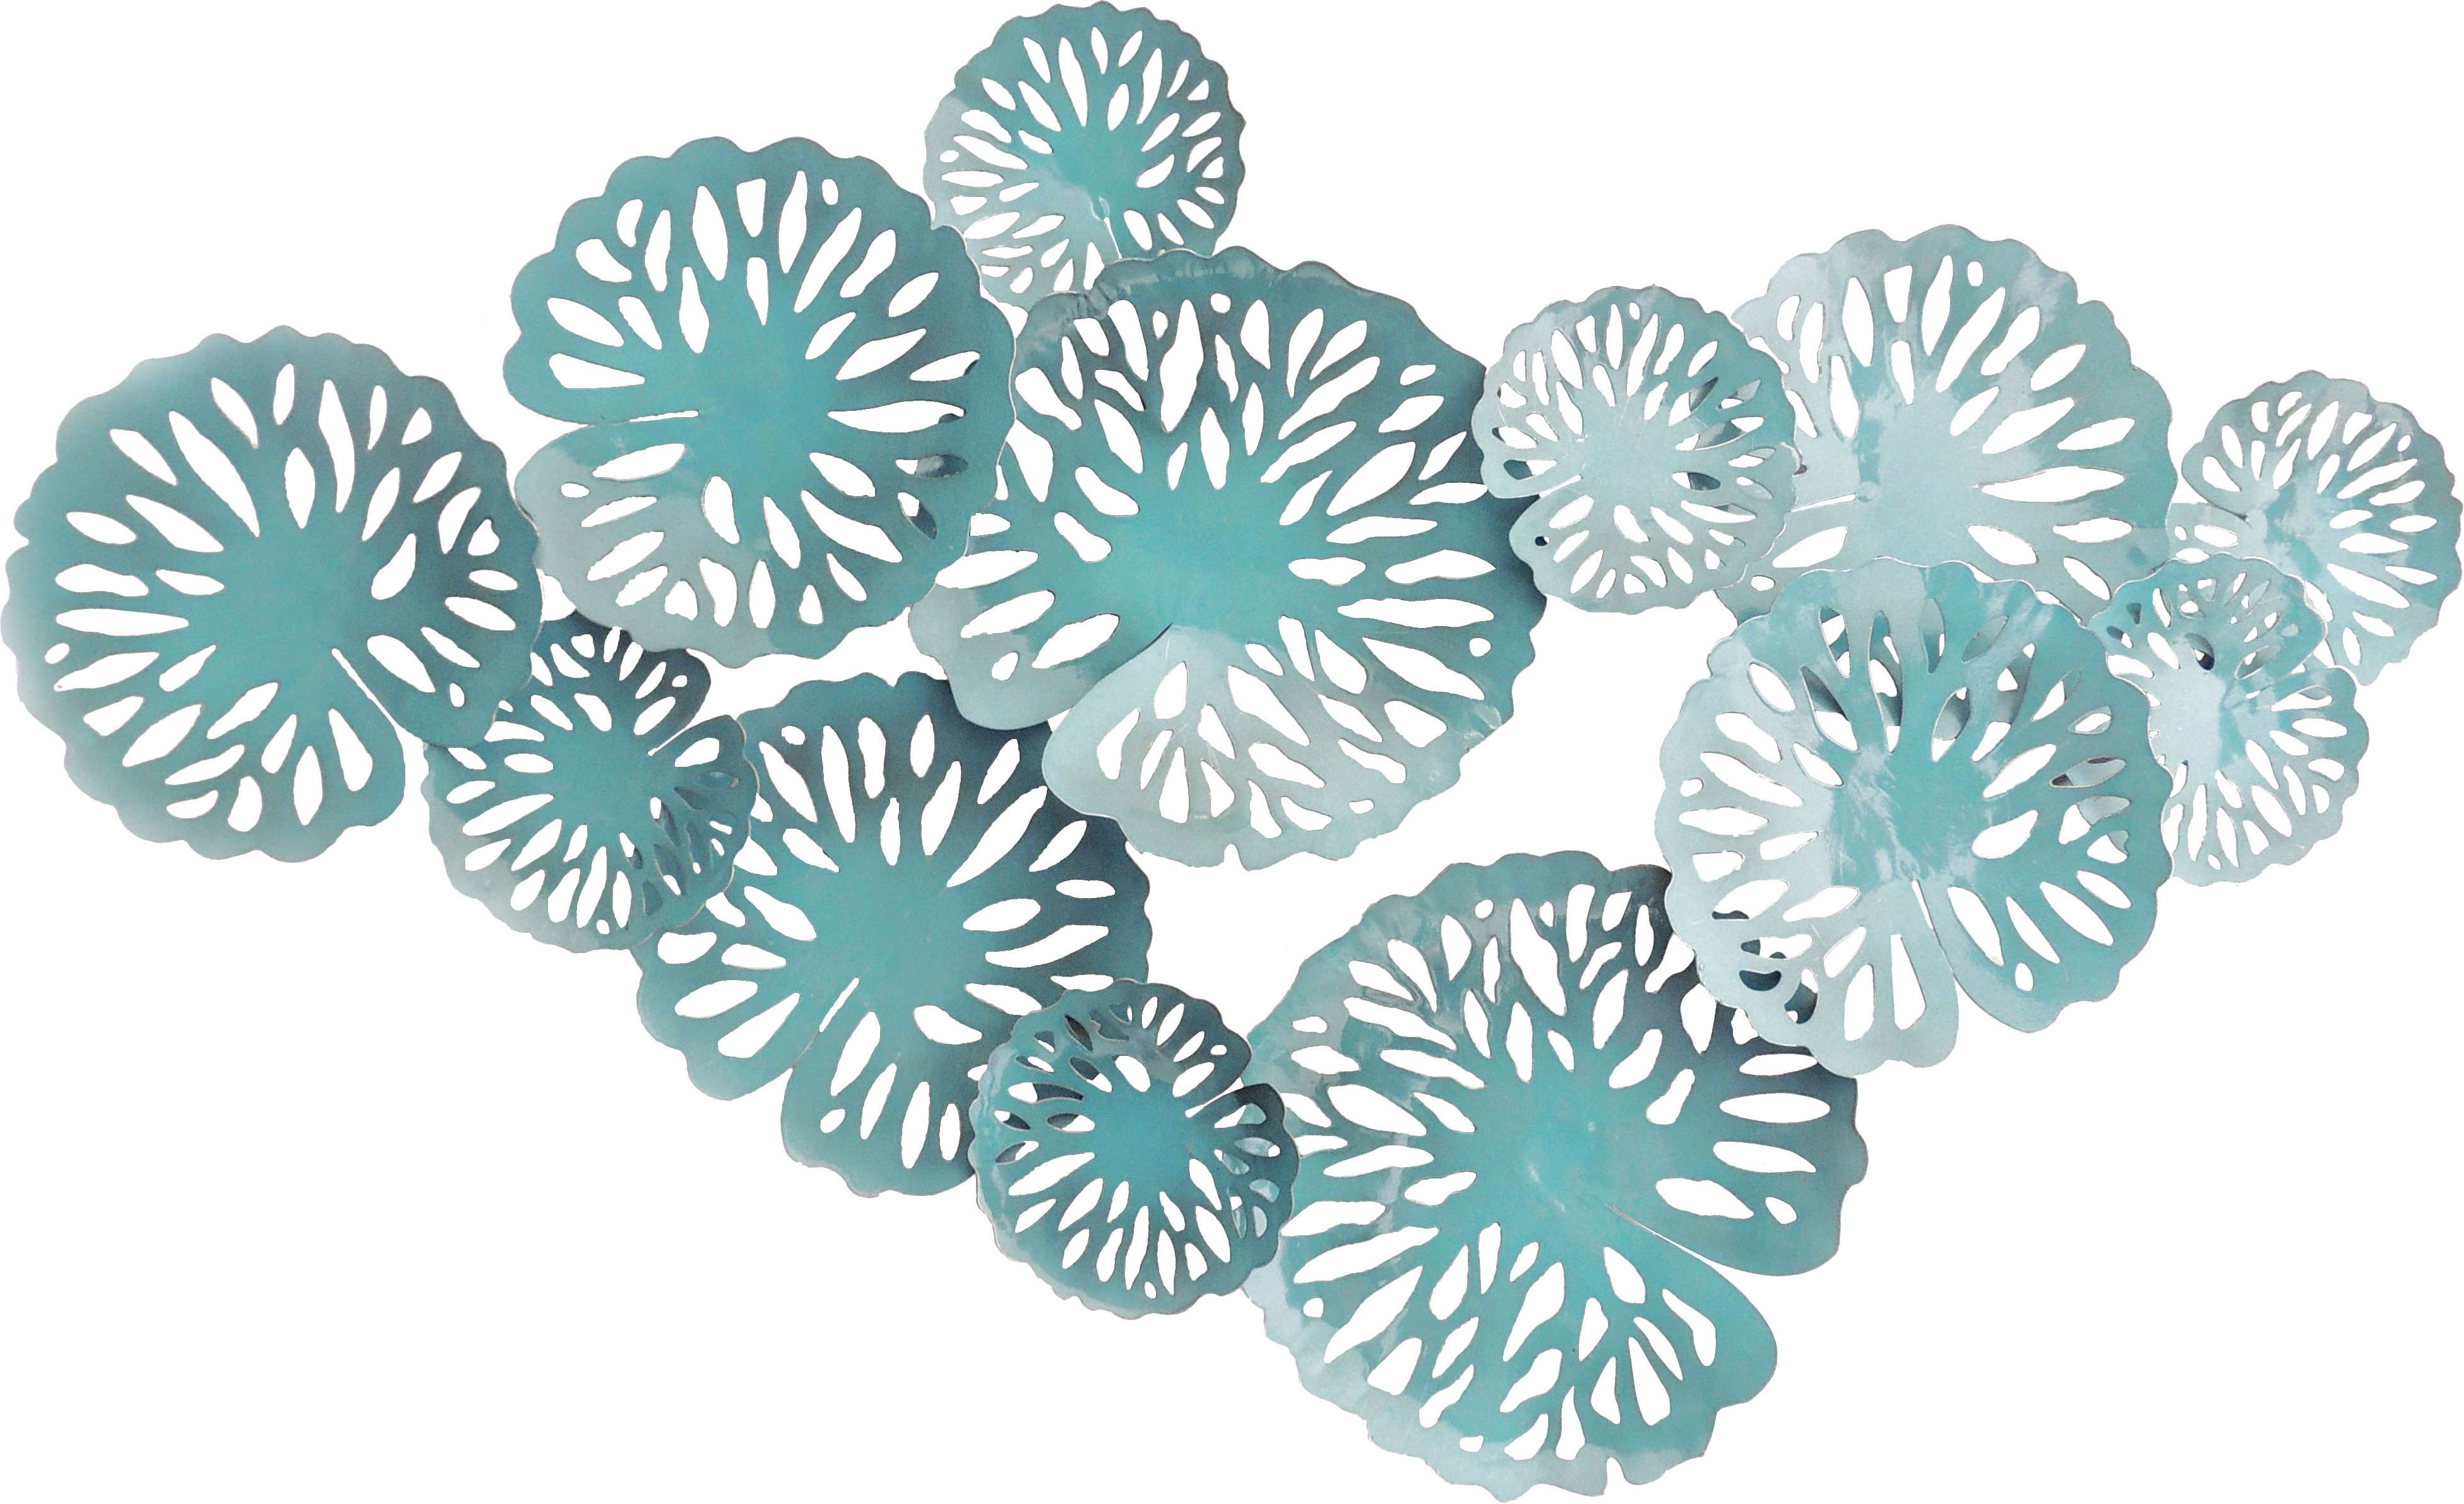 Yelton 3 Piece Starfish Wall Decor Sets Within Most Popular Sand Dollar Cluster Wall Décor & Reviews (View 17 of 20)